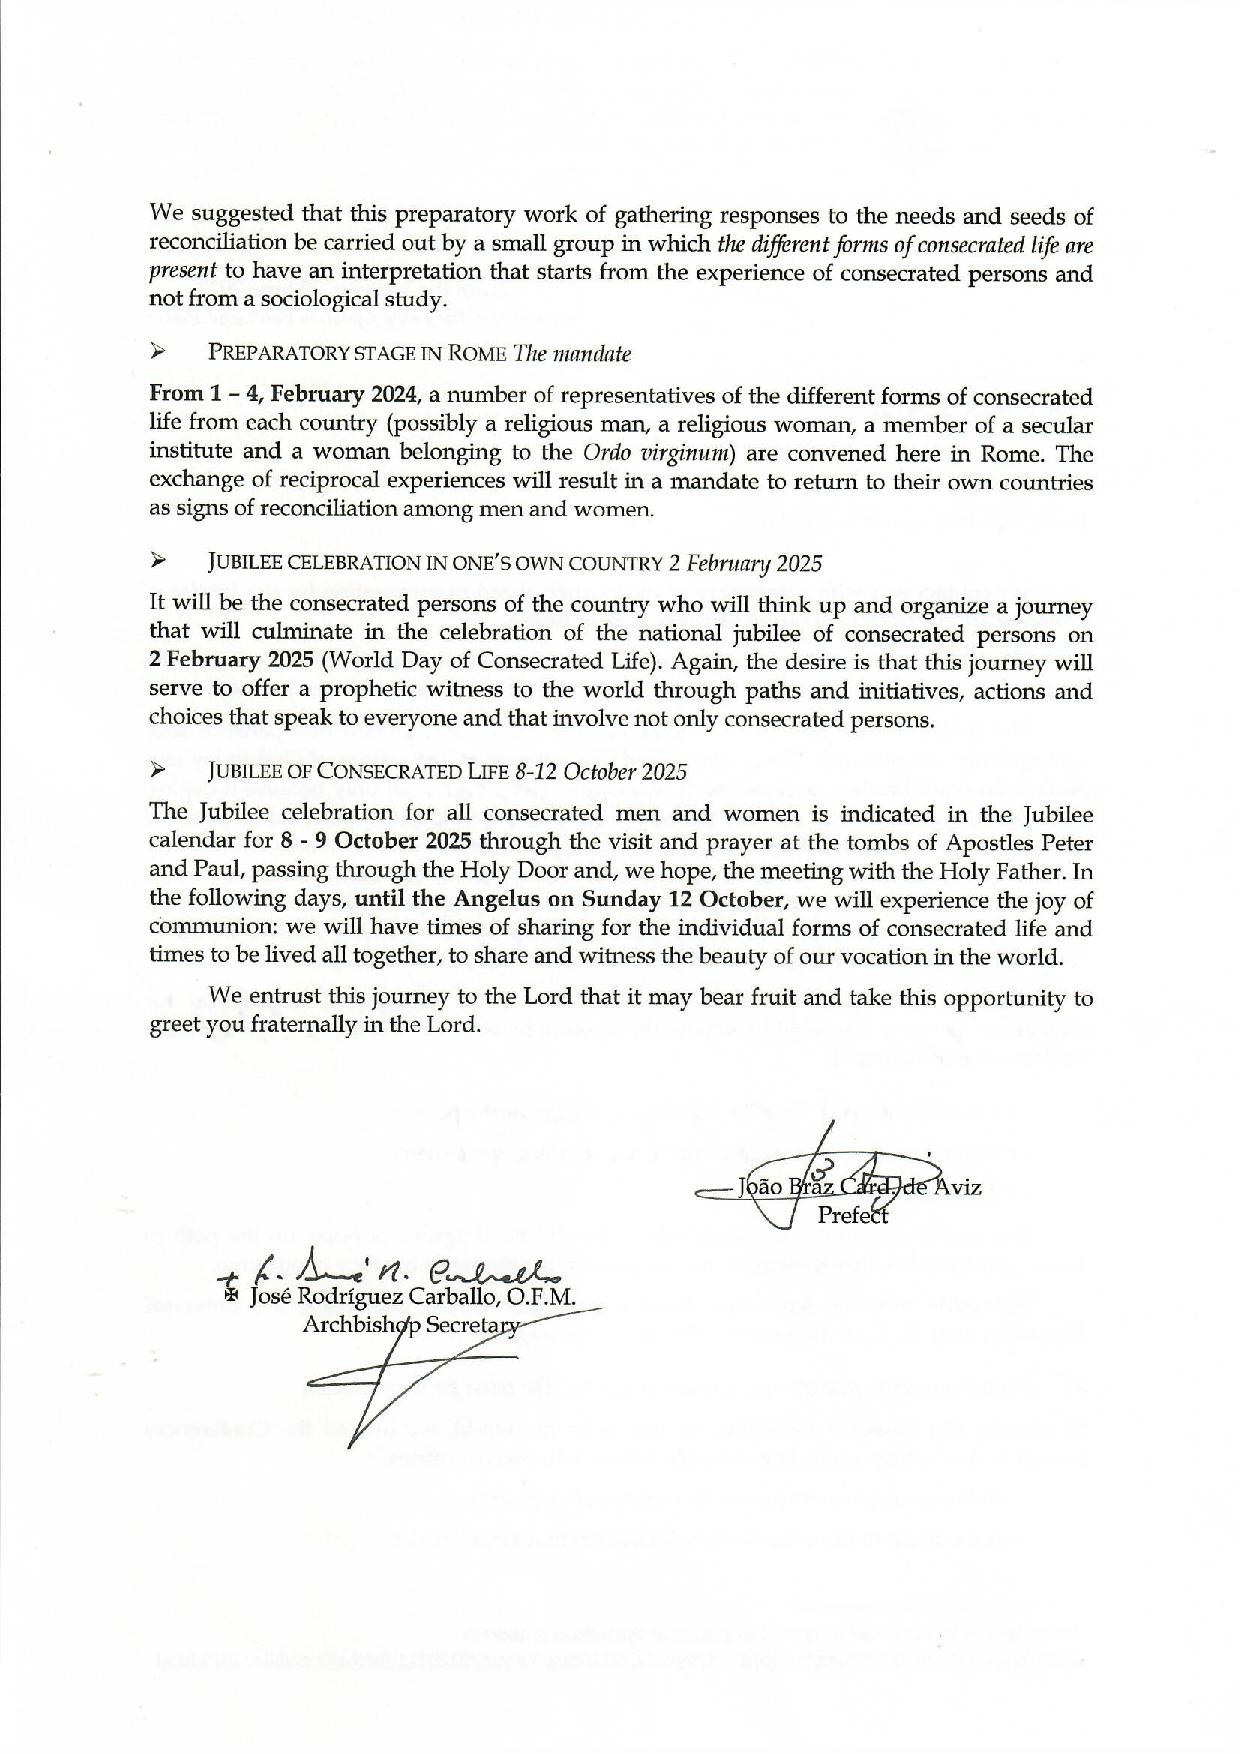 IUBILAEUM 2025 - EN - To all members of consecrated life (1)-page-002.jpg